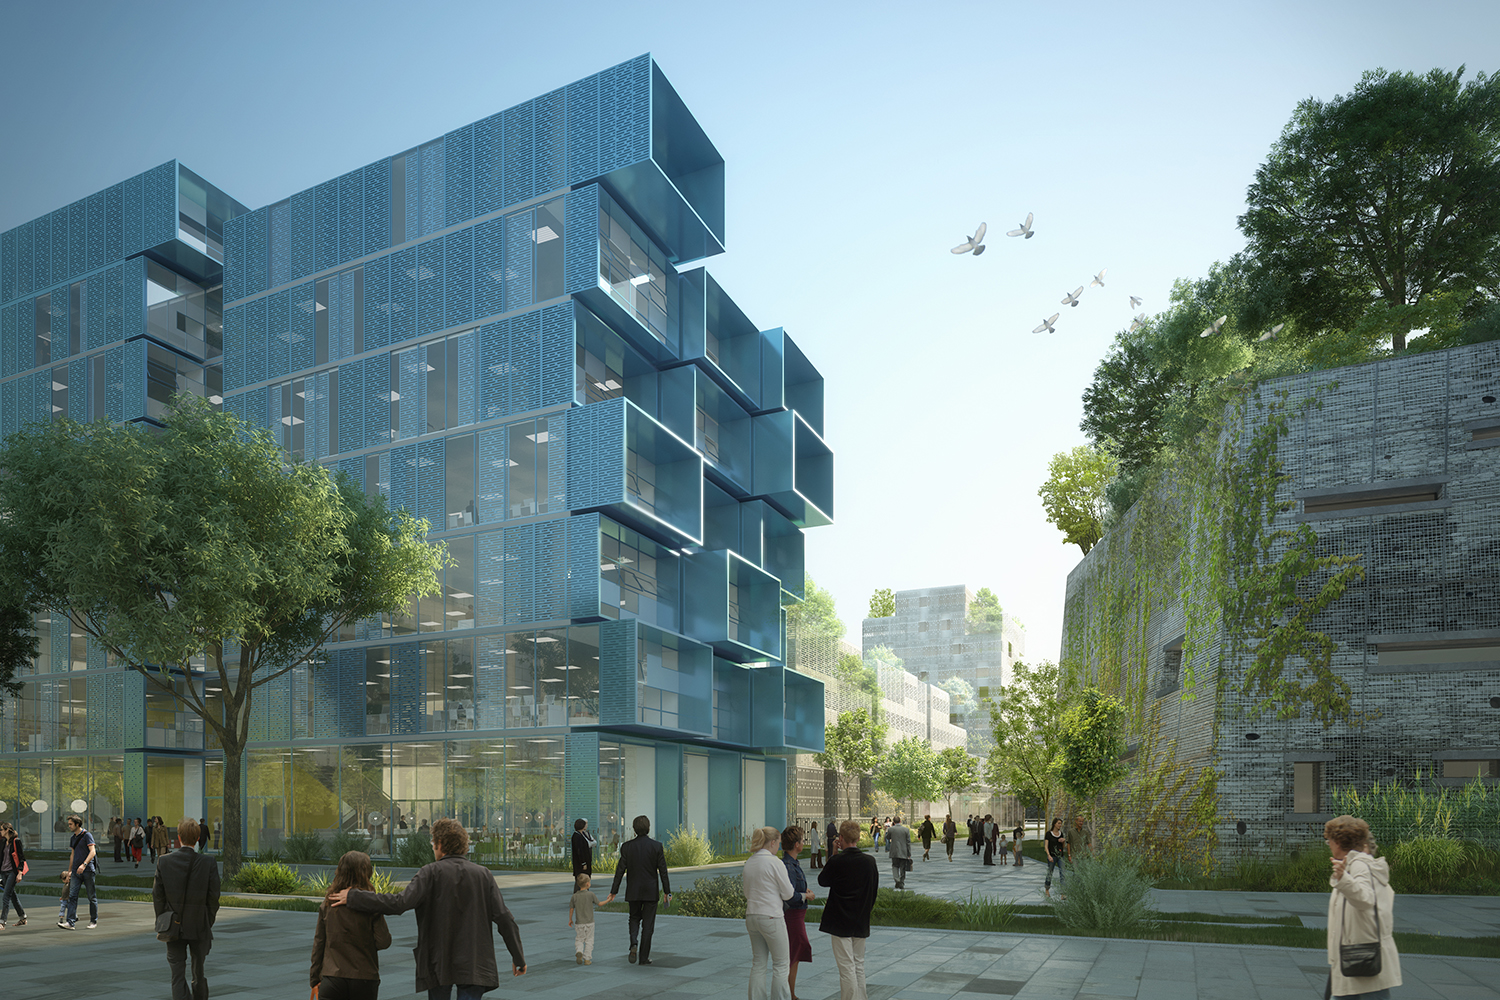 Rendering of modular glass building surrounded by pedestrian paths.